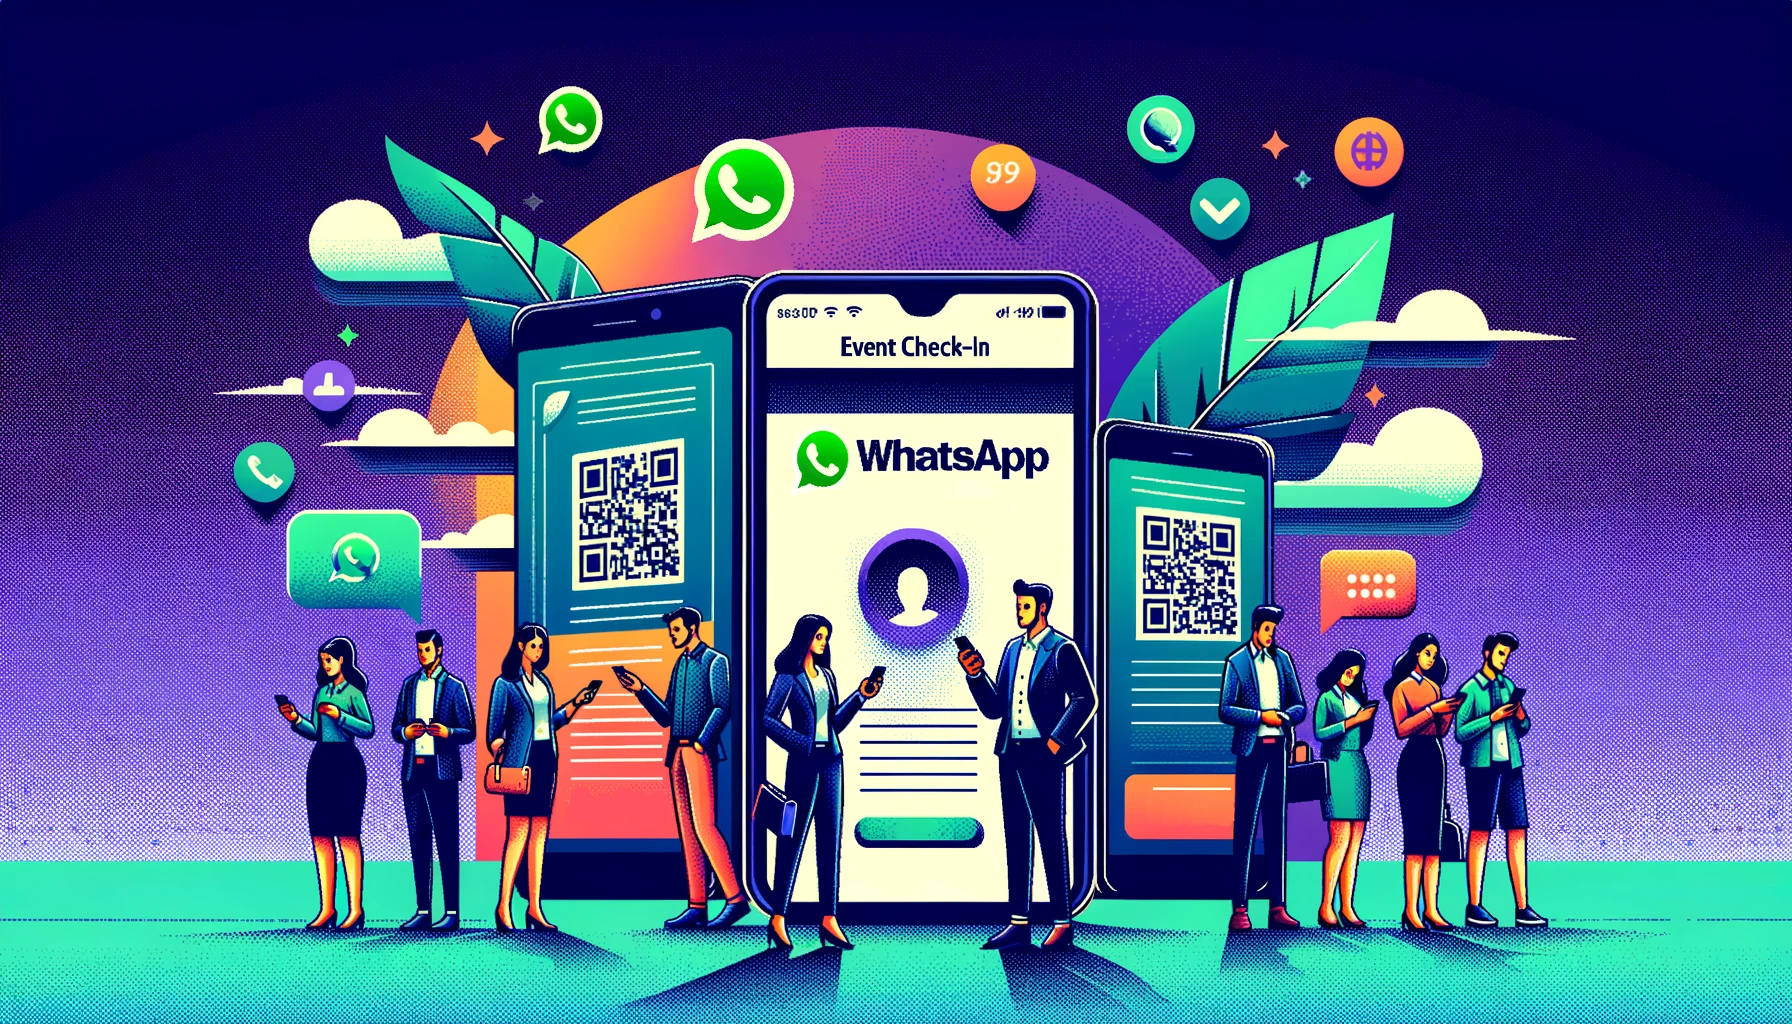 WhatsApp as an Alternative to Event Check-in Apps